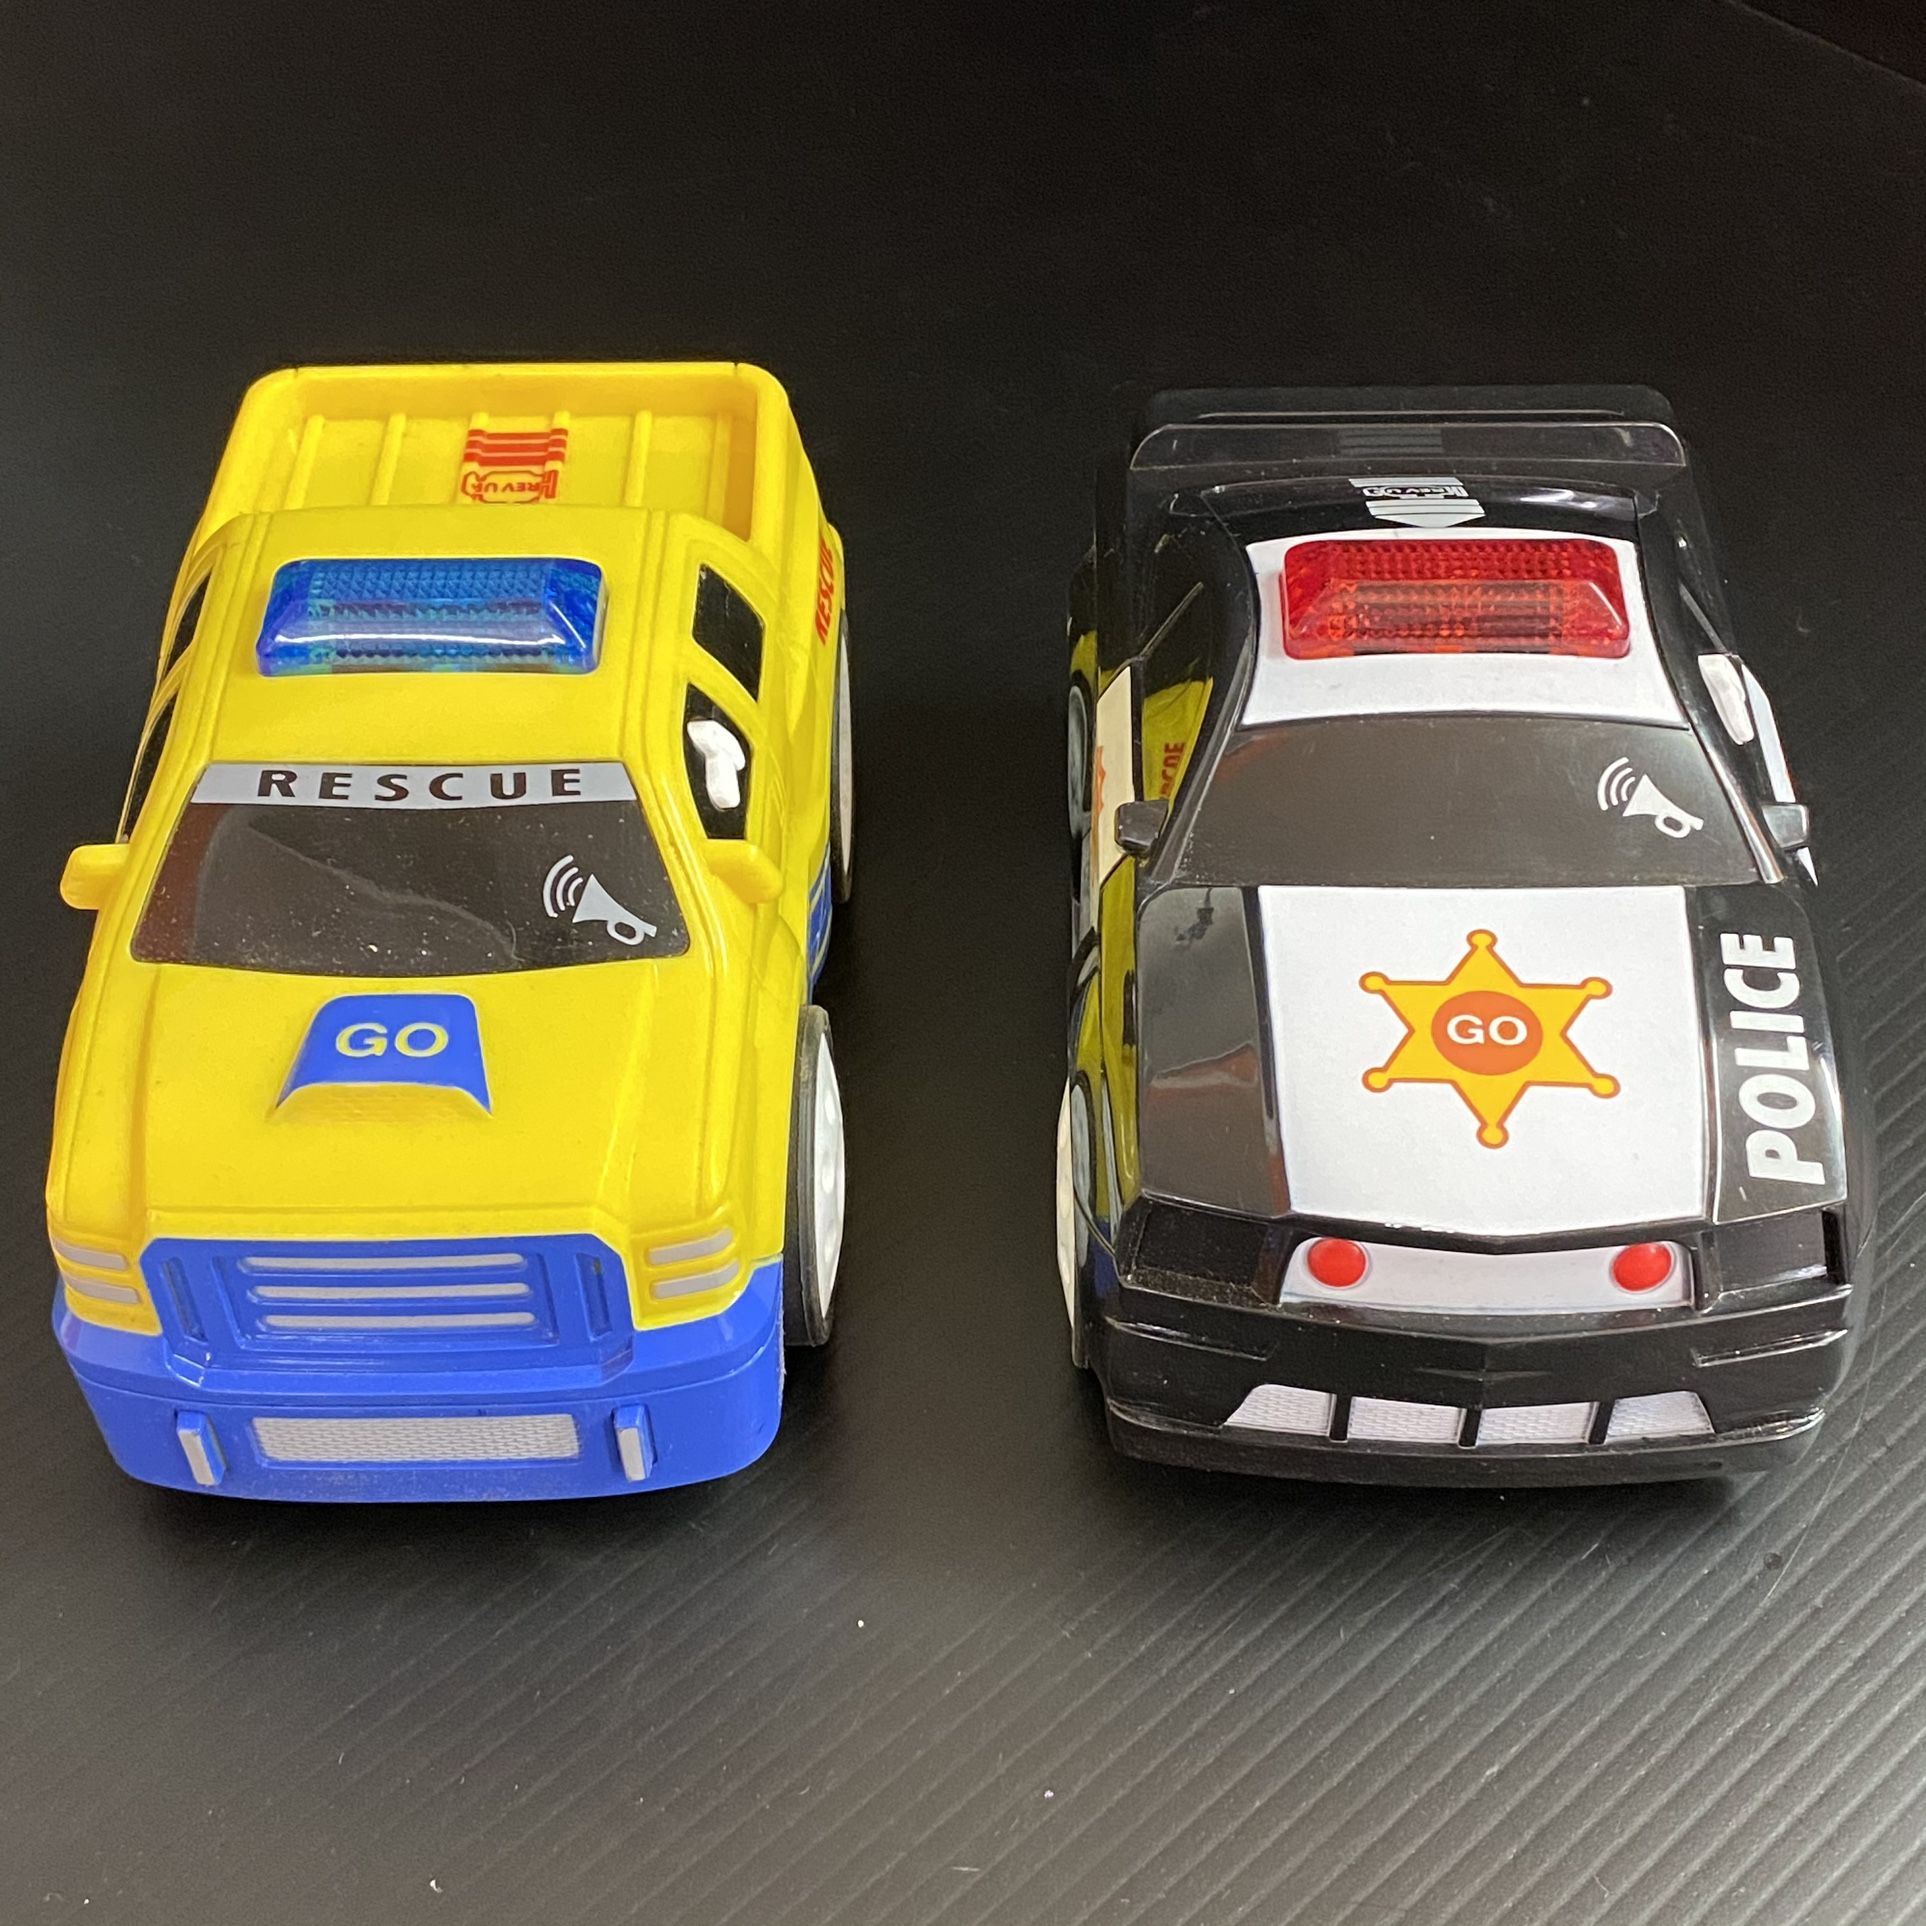 Emergency Vehicle Toys - Rescue Truck and Police Car